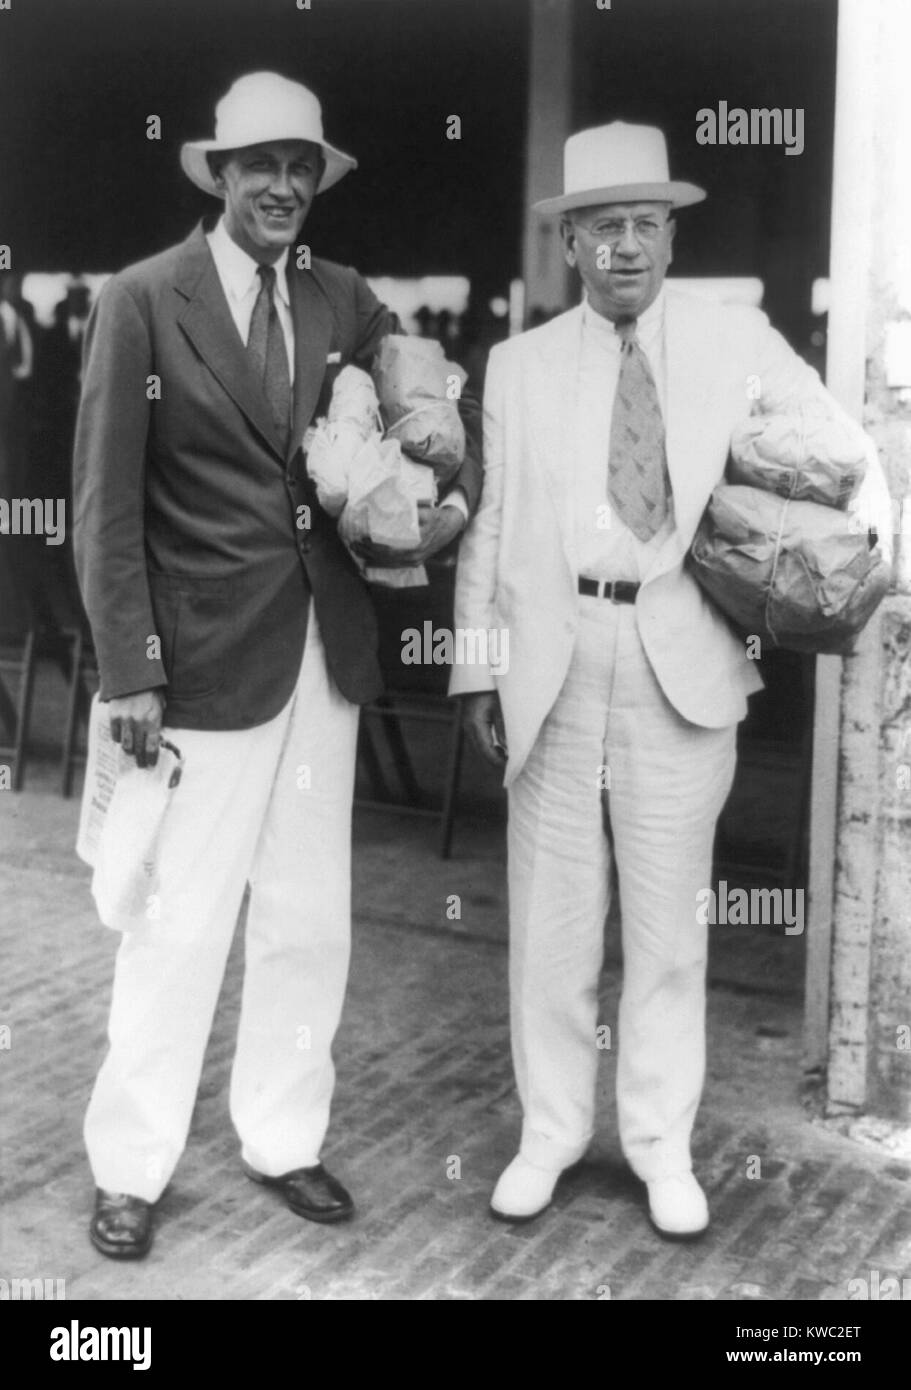 FDR's feuding but indispensable New Dealers, Harold L. Ickes and Harry Hopkins. Oct. 19, 1935 during a trip to Panama with FDR, when he tried unsuccessfully to reconcile their differences. Ickes managed the PWA, the large-scale Public Works Administration whose construction projects required long term oversight. Hopkins headed the Works Progress Administration (WPA), whose small work projects became the largest employer in the country during the Great Depression. (BSLOC 2015 2 245) Stock Photo